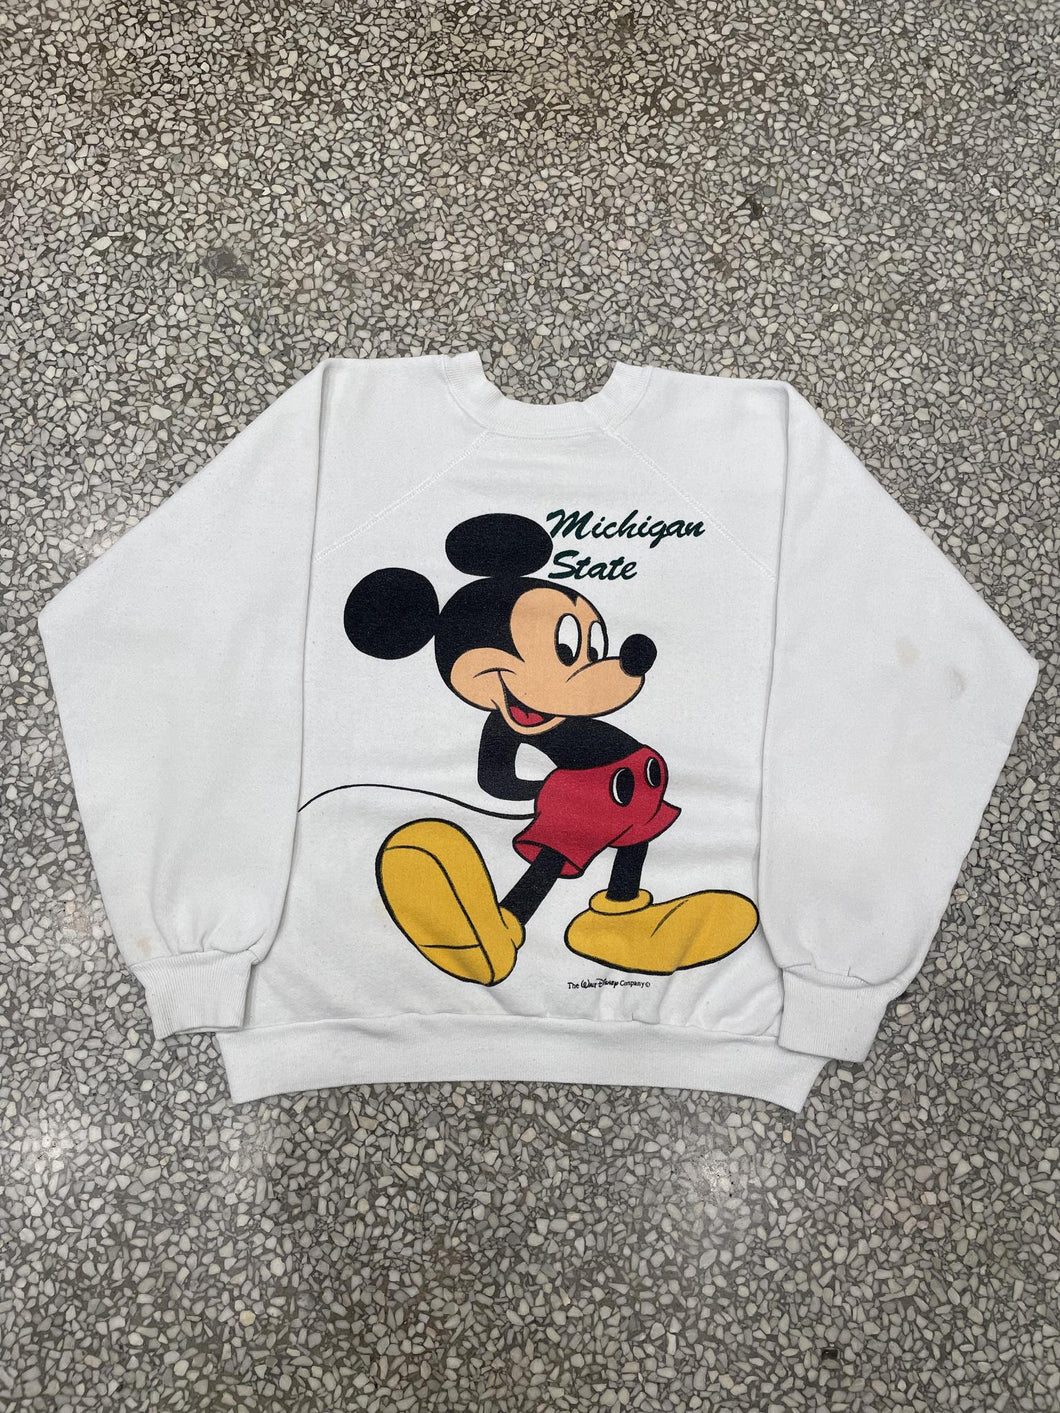 Michigan State Vintage 80s Mickey Mouse Crewneck Faded White ABC Vintage 